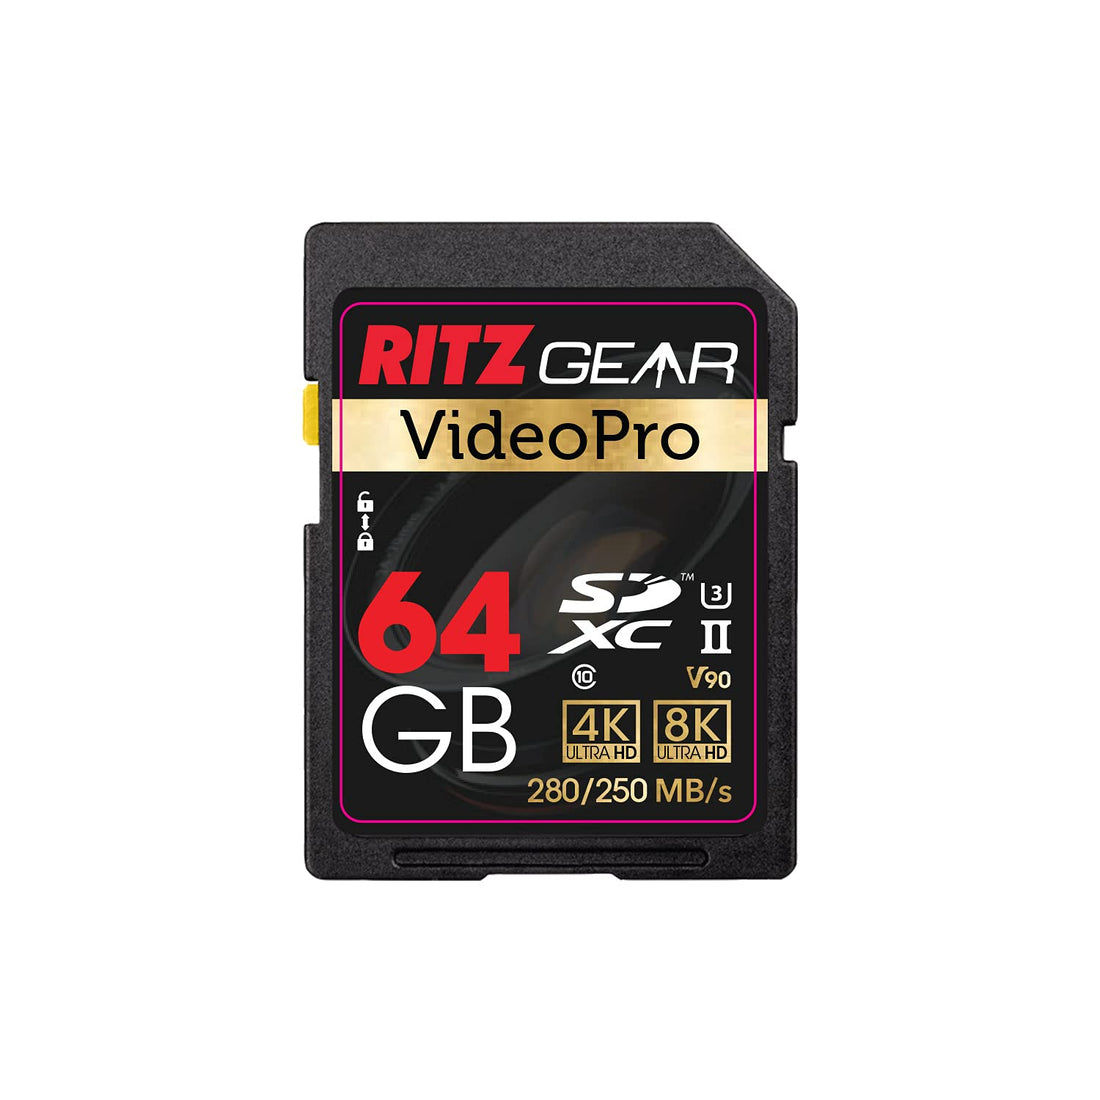 Ritz Gear SD Card UHS-II 64GB SDXC Memory Card U3 V90 A1, Extreme Performance Professional Sd-Card (R 280mb/s 250mb/s W) for Advanced DSLR,Well-Suited for Video, Including 4K,8K, 3D, Full HD Video